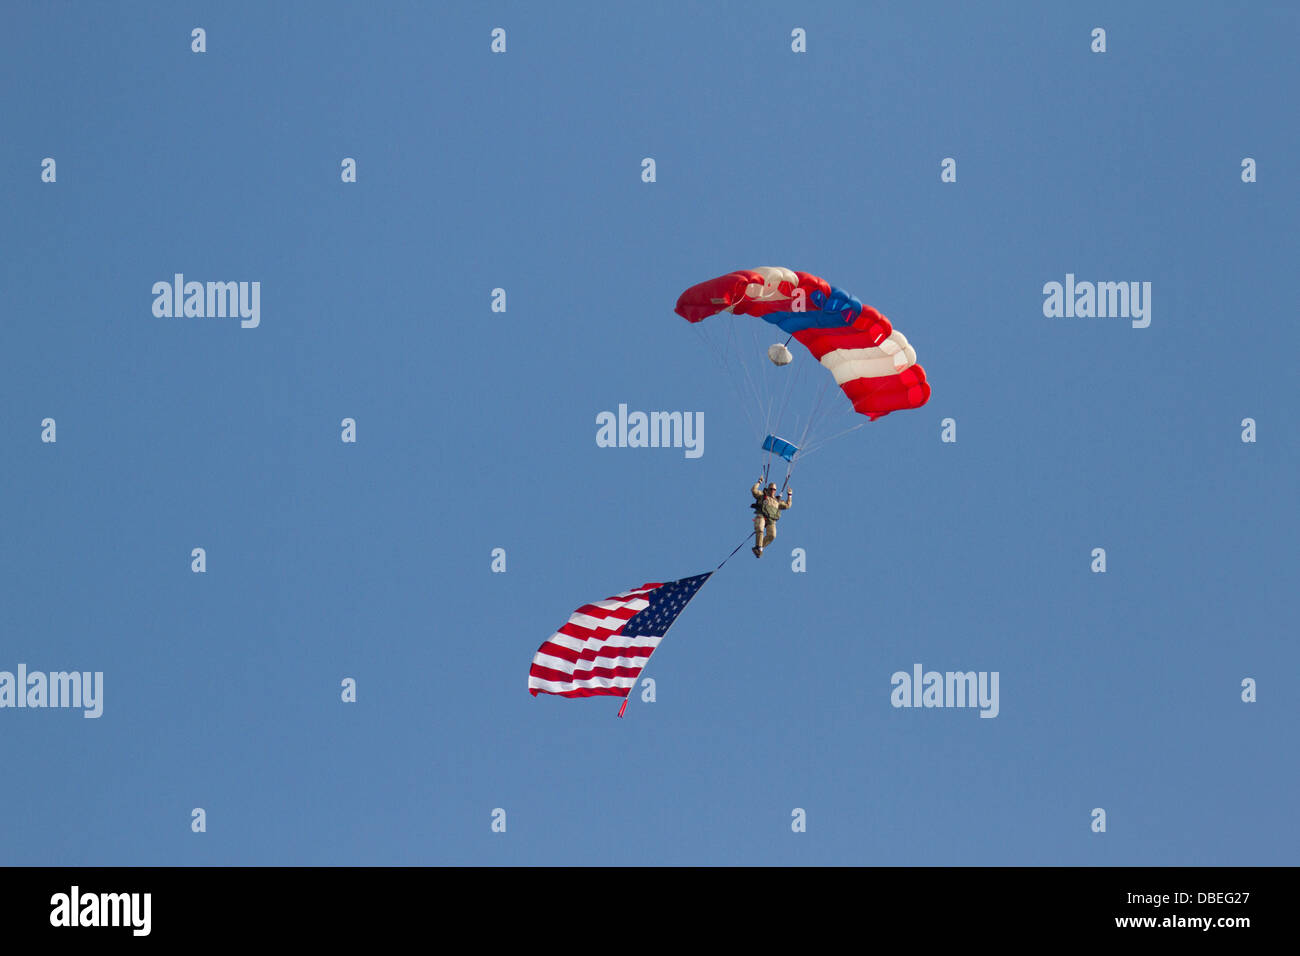 Skydiver with parachute and American flag. Stock Photo